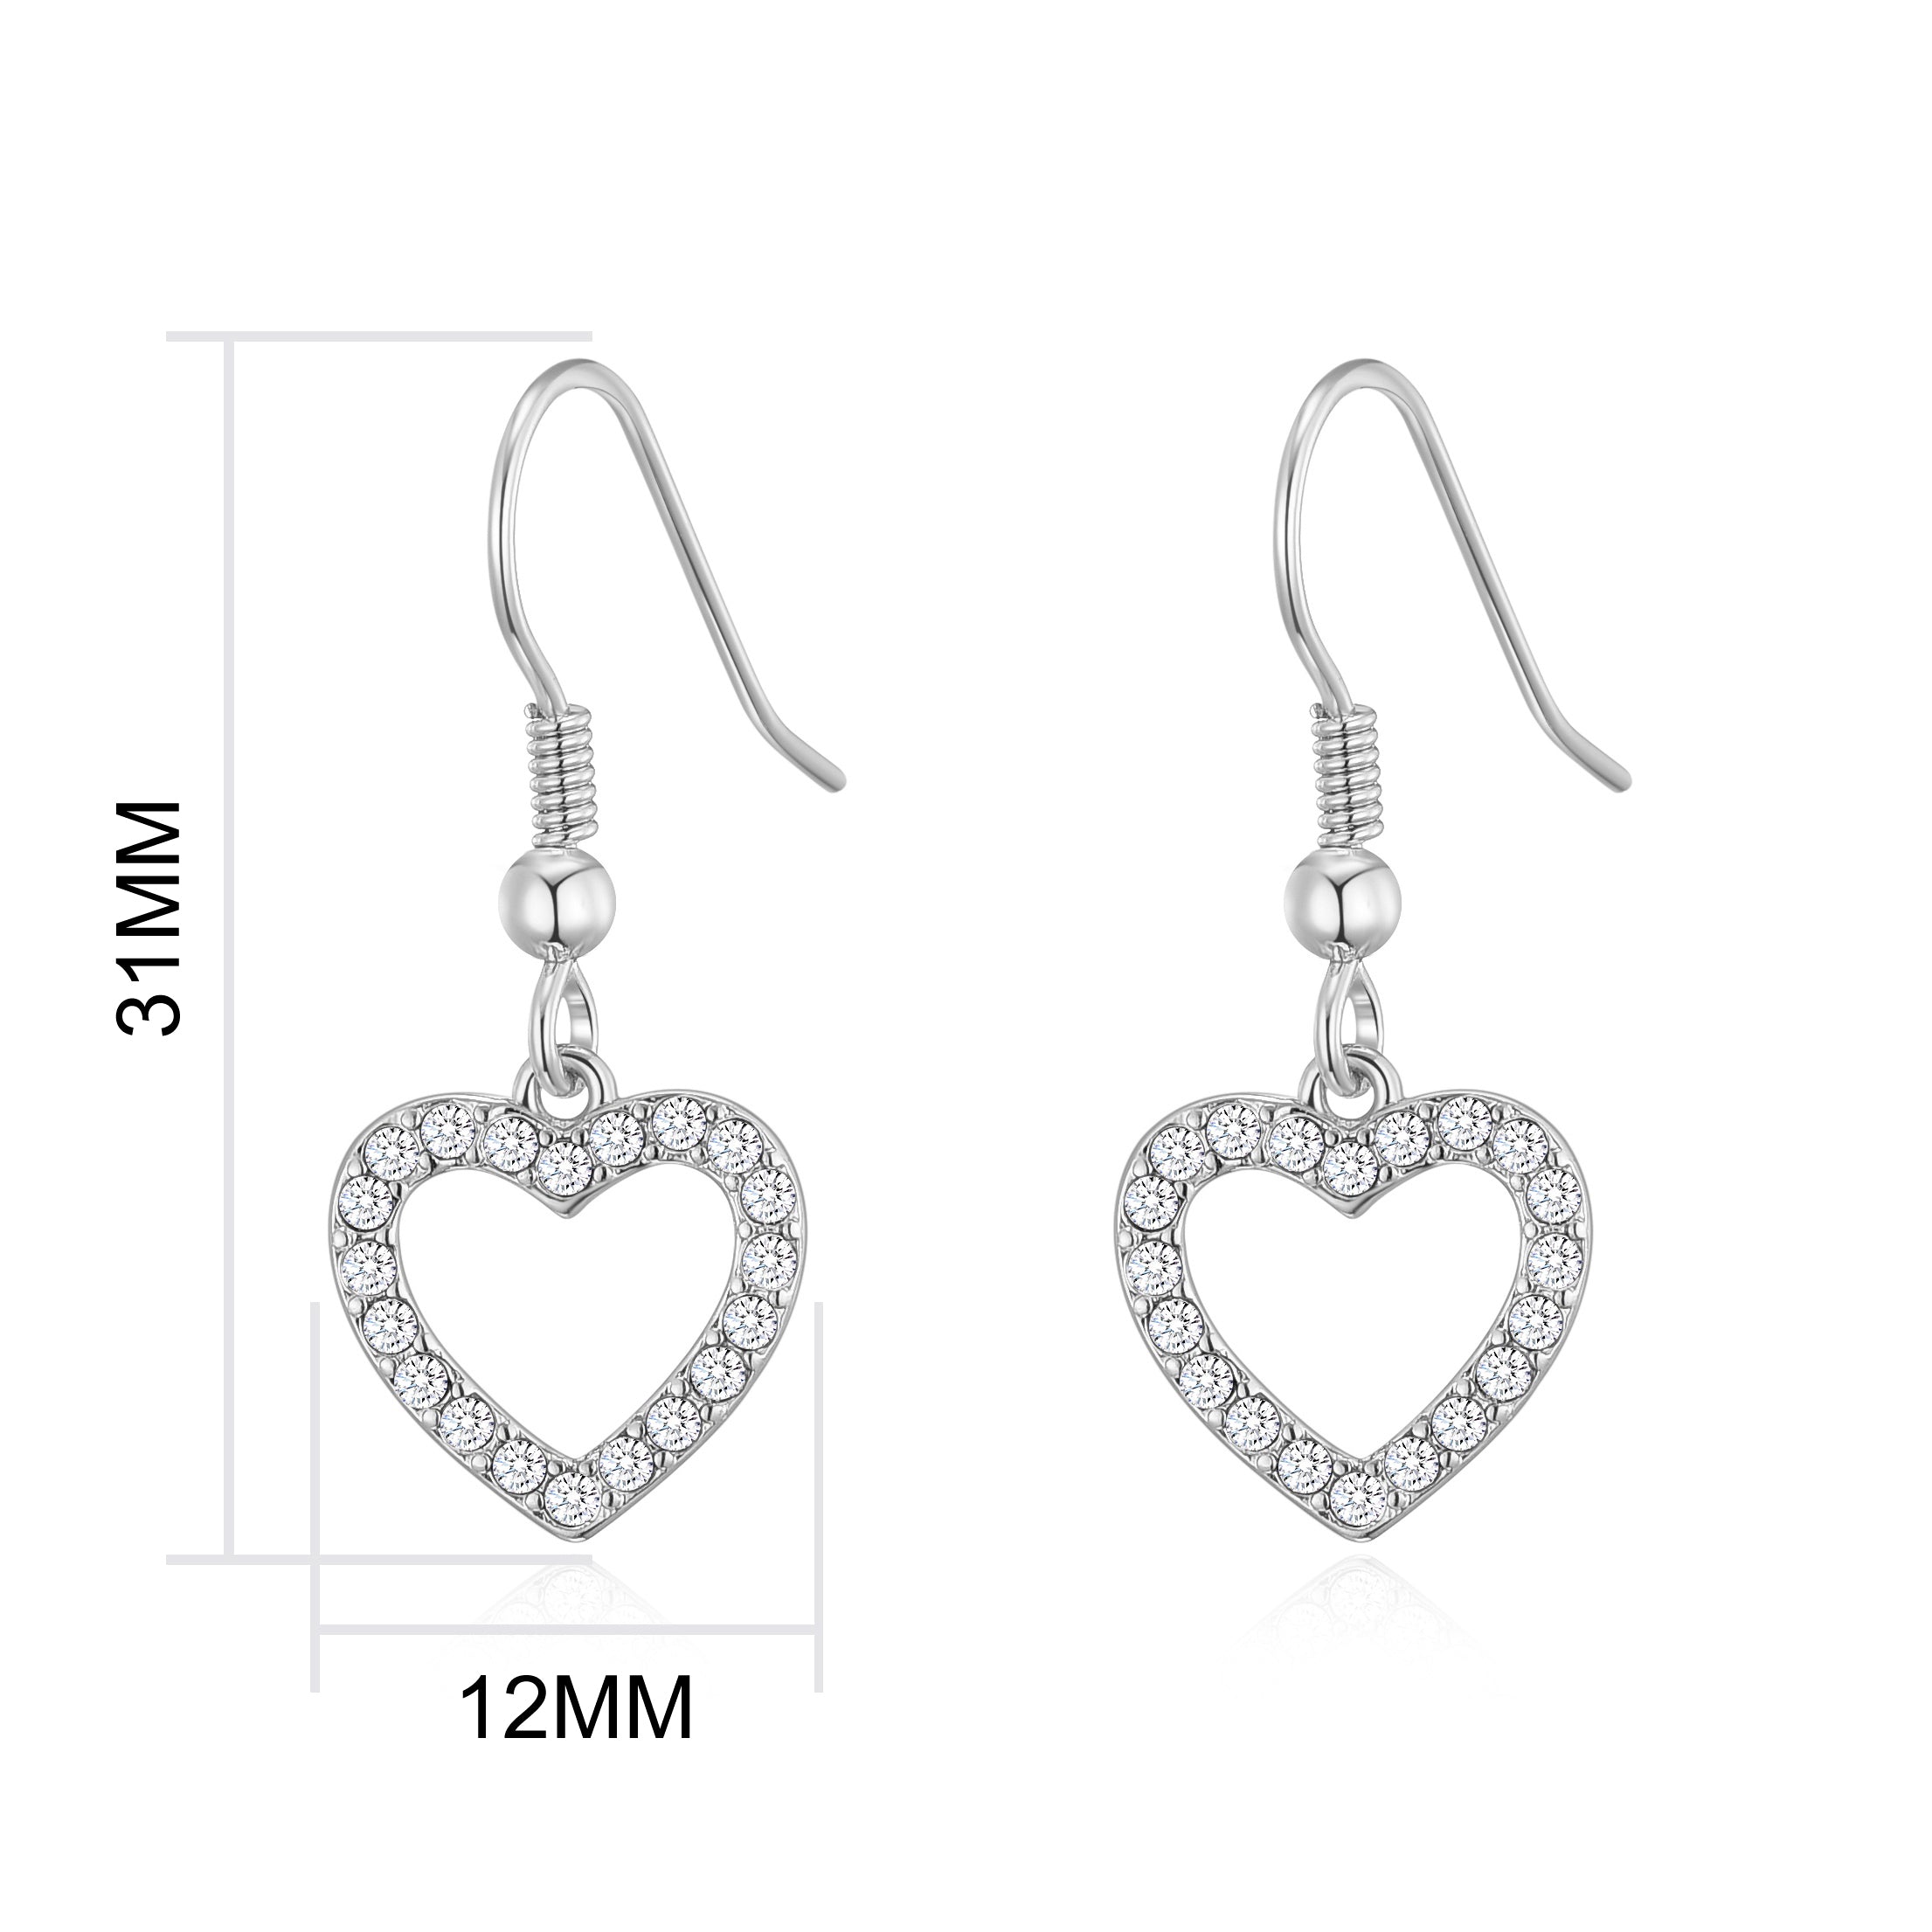 Silver Plated Open Heart Drop Earrings Created with Zircondia® Crystals